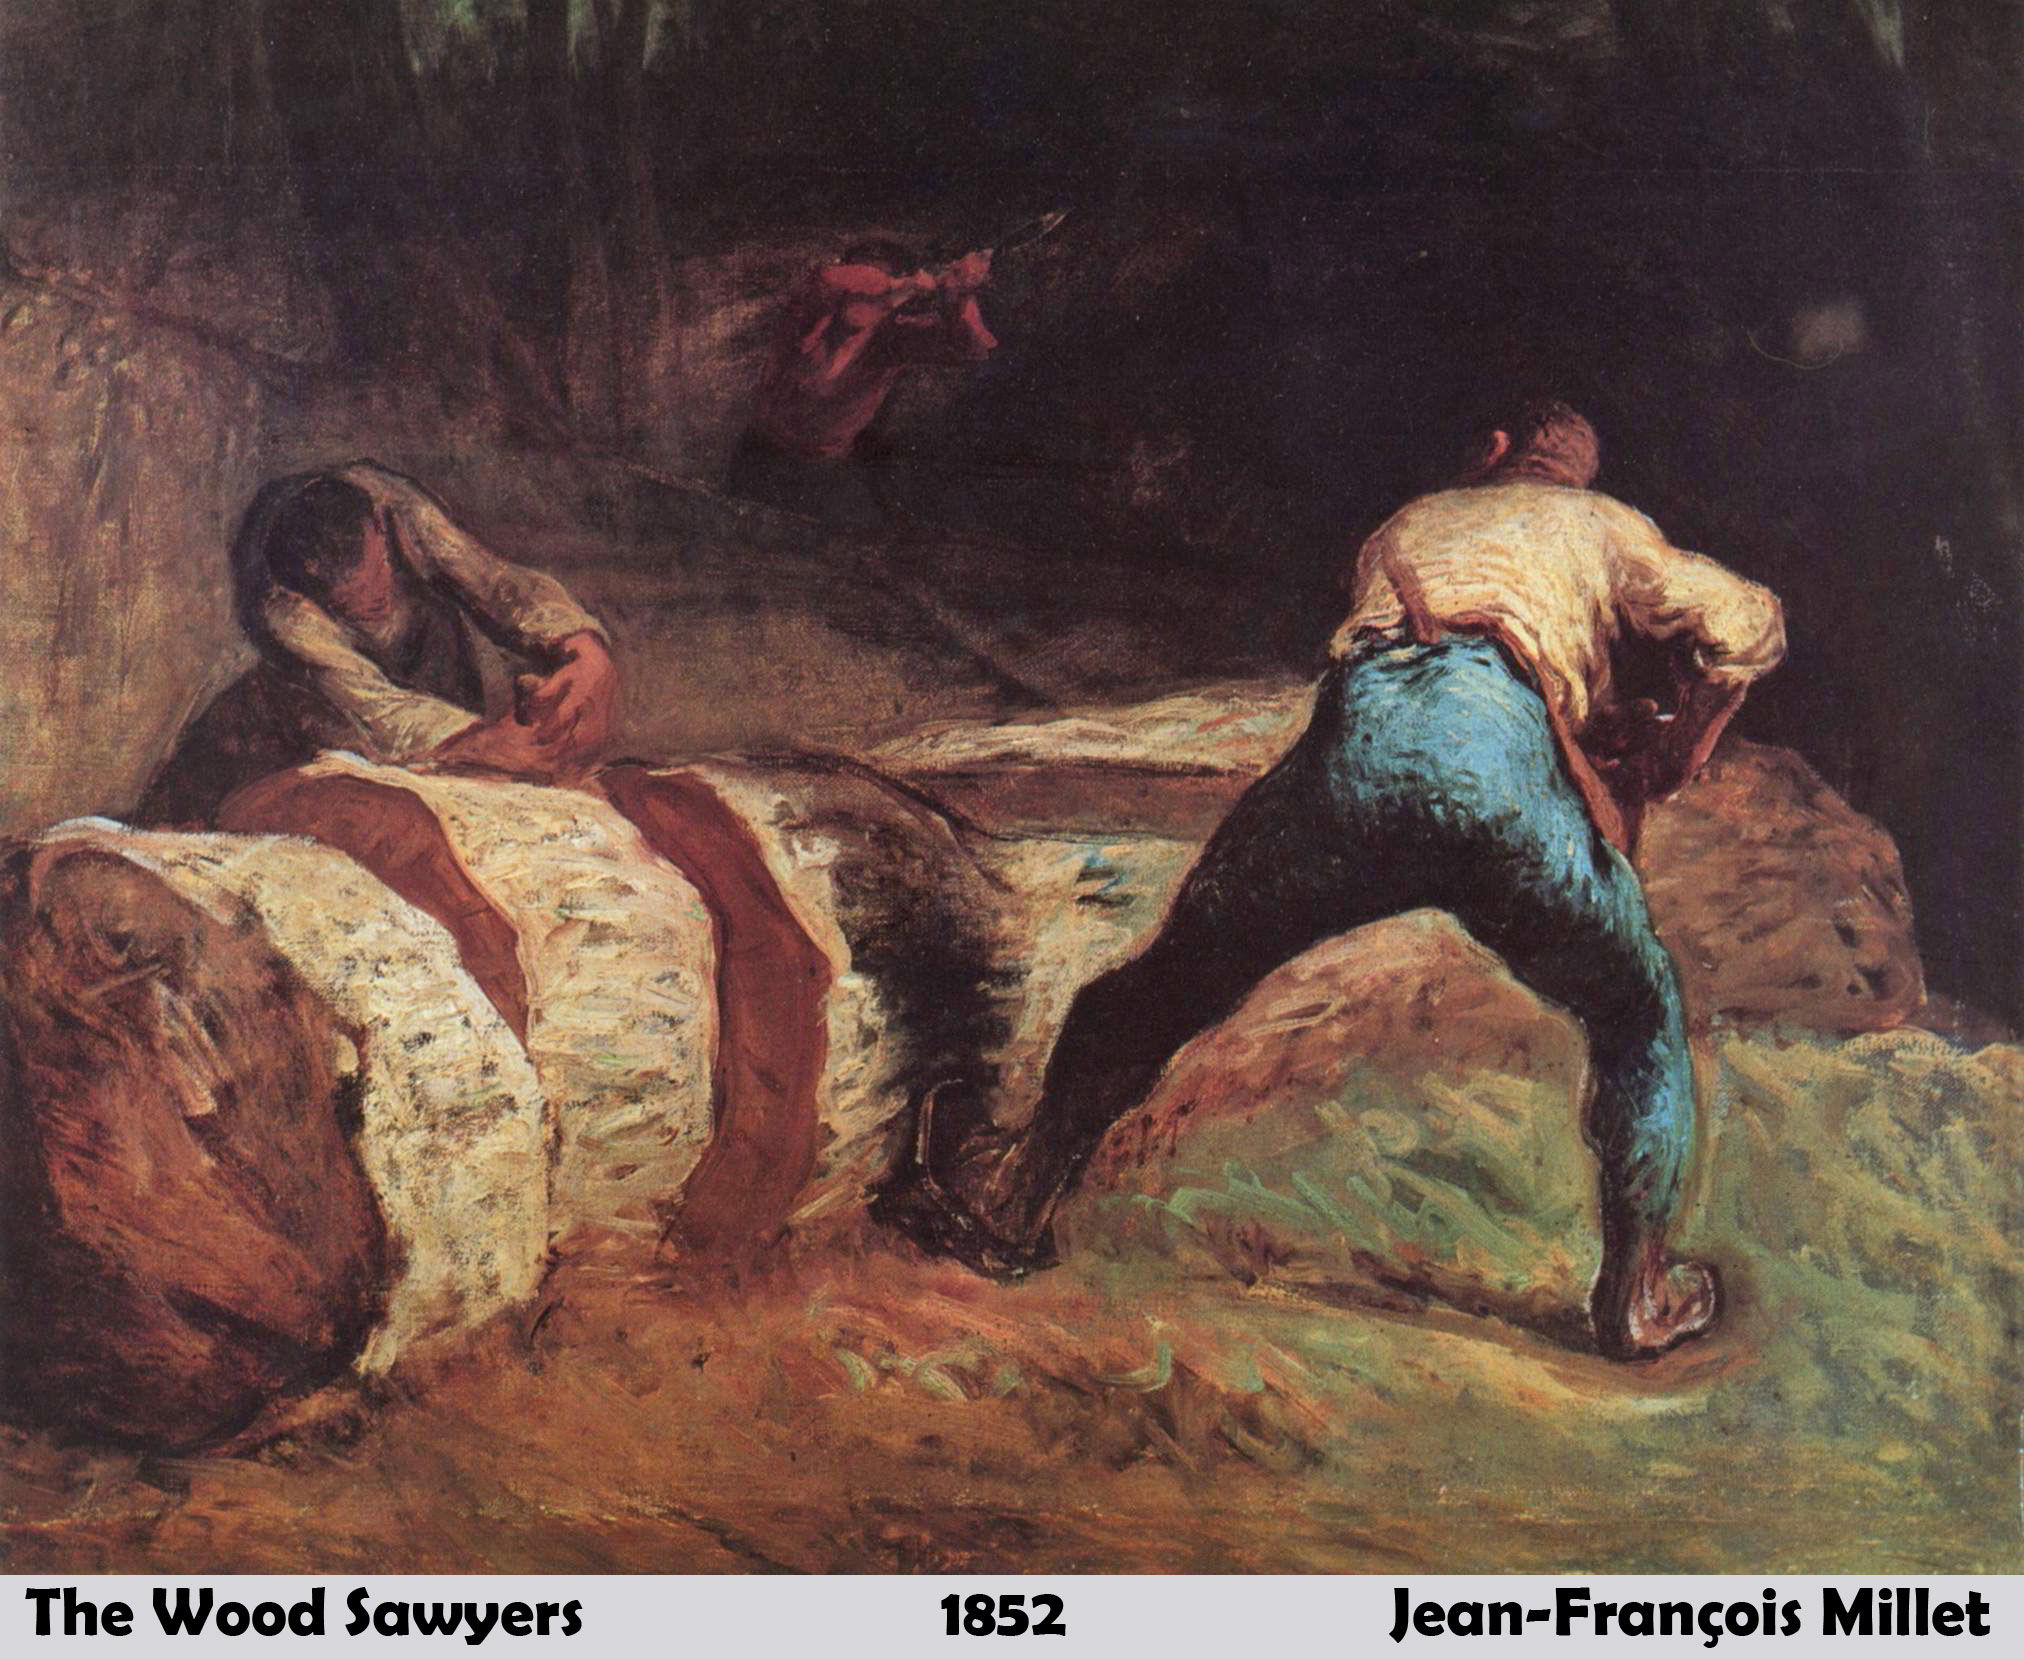 The Wood Sawyers by Jean Francois Millet